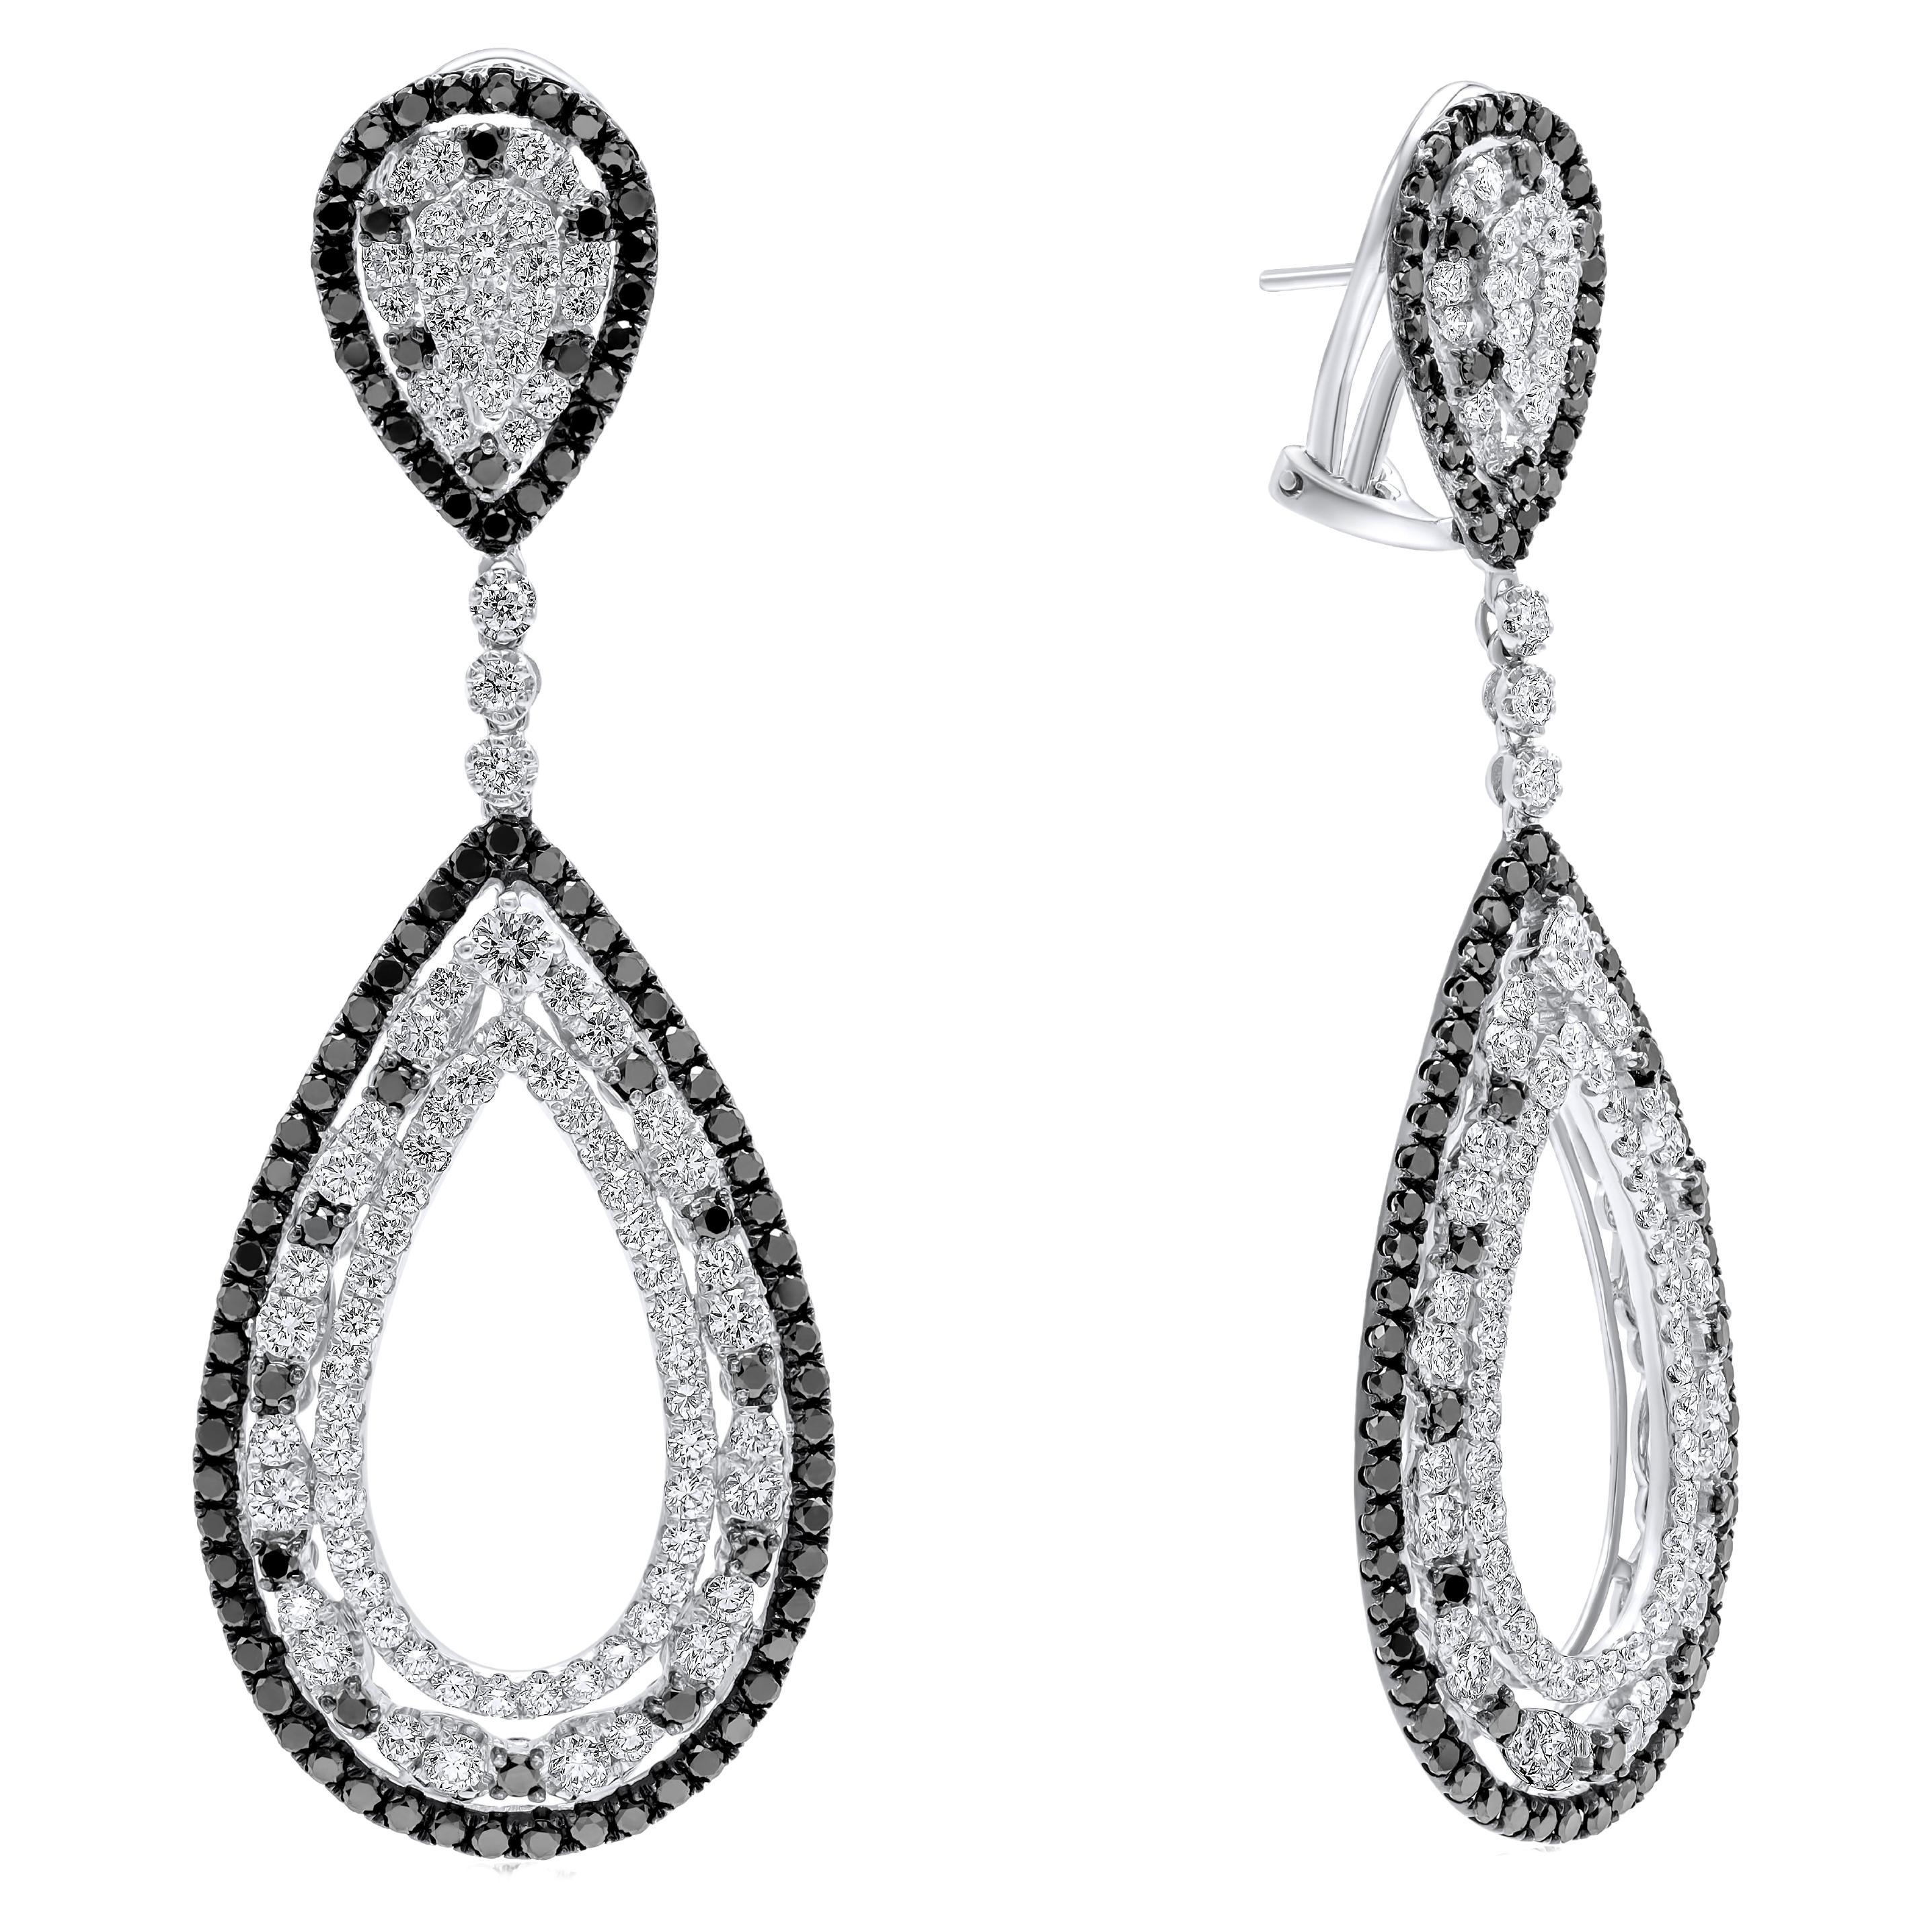 Diana M.18 kt white gold diamond earring adorned with multiple drop shaped rings For Sale